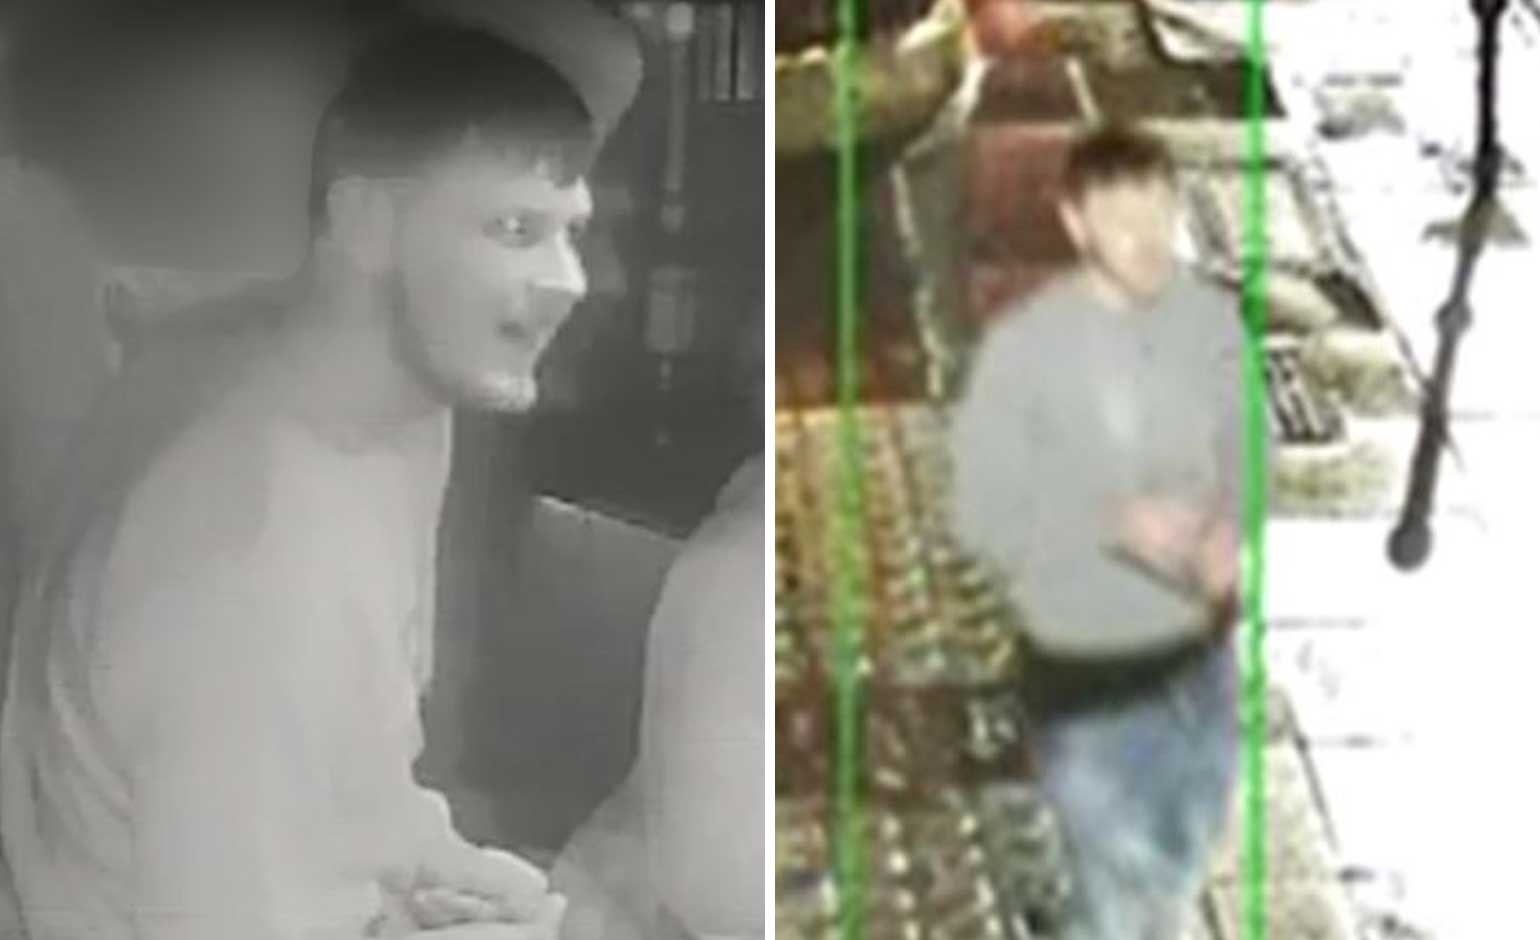 Police release CCTV images as part of ongoing Bath GBH inquiry